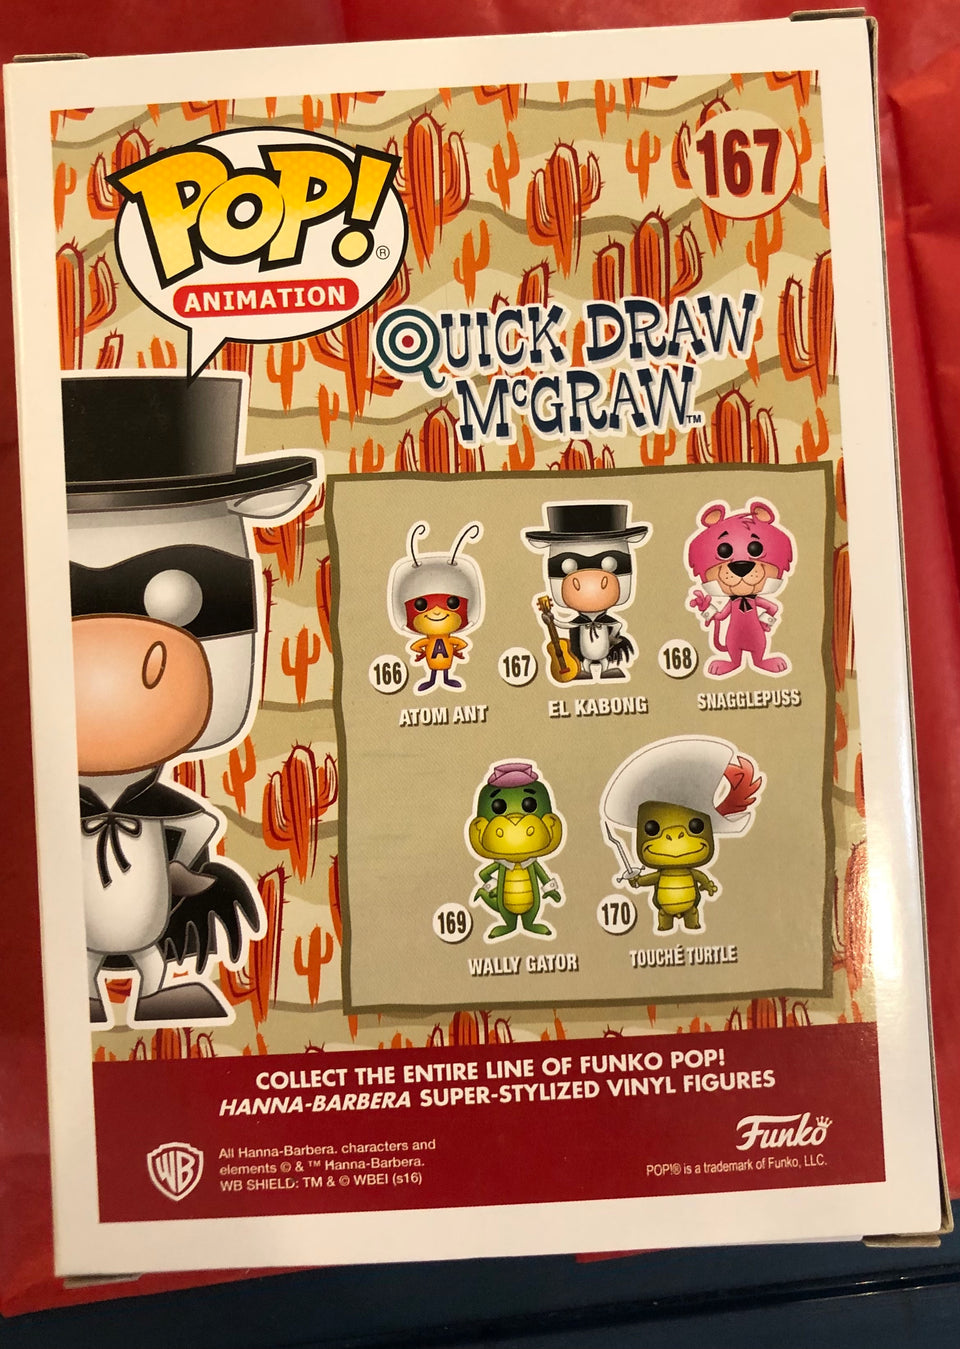 Funko Pop! Animation Quick Draw McGraw Specialty Series El Kabong #167